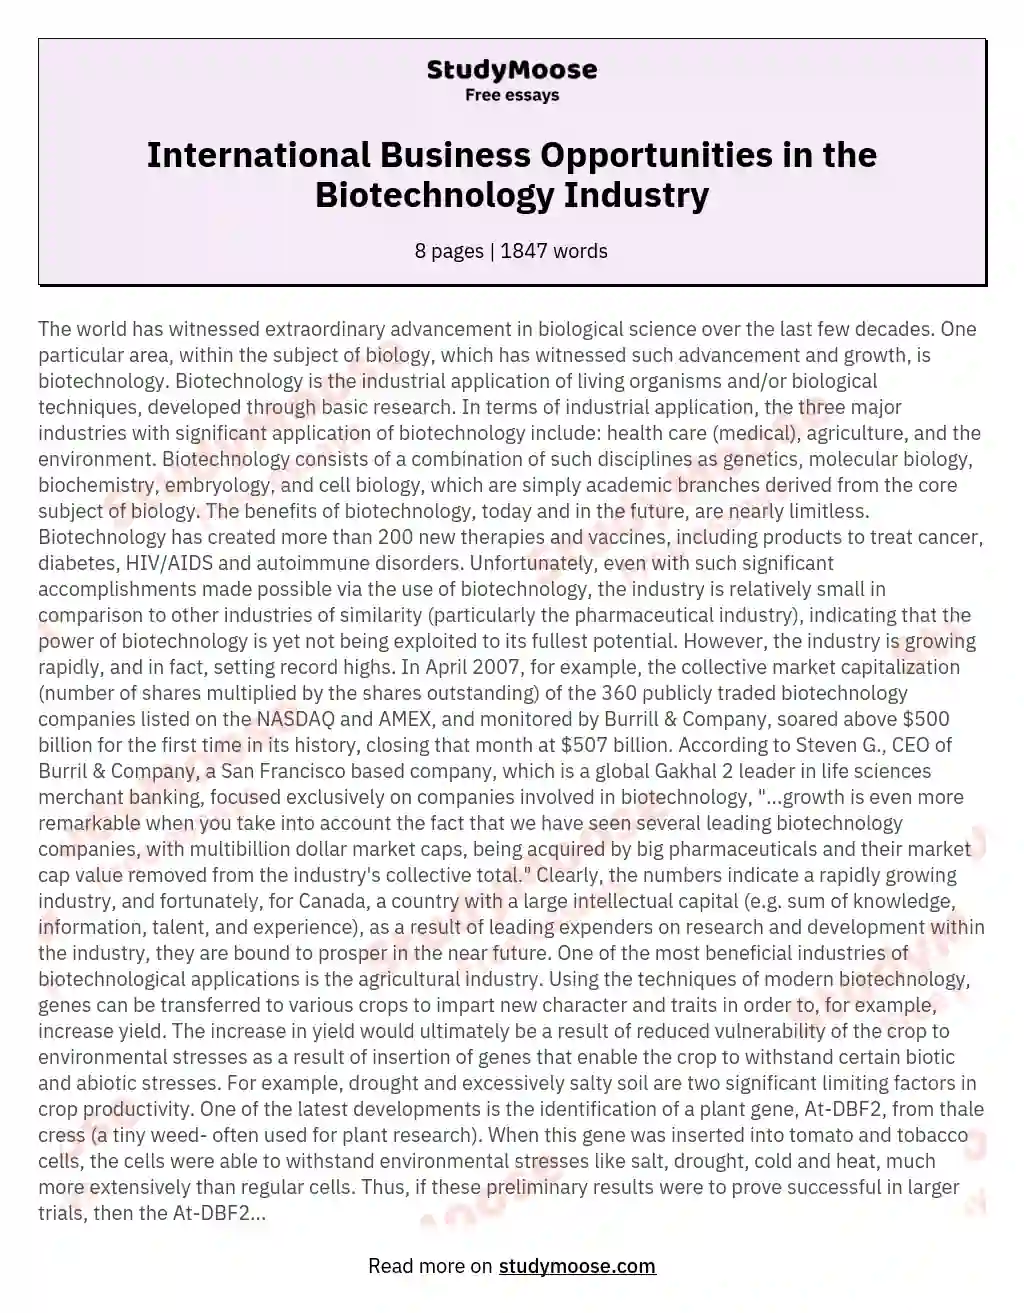 International Business Opportunities in the Biotechnology Industry essay